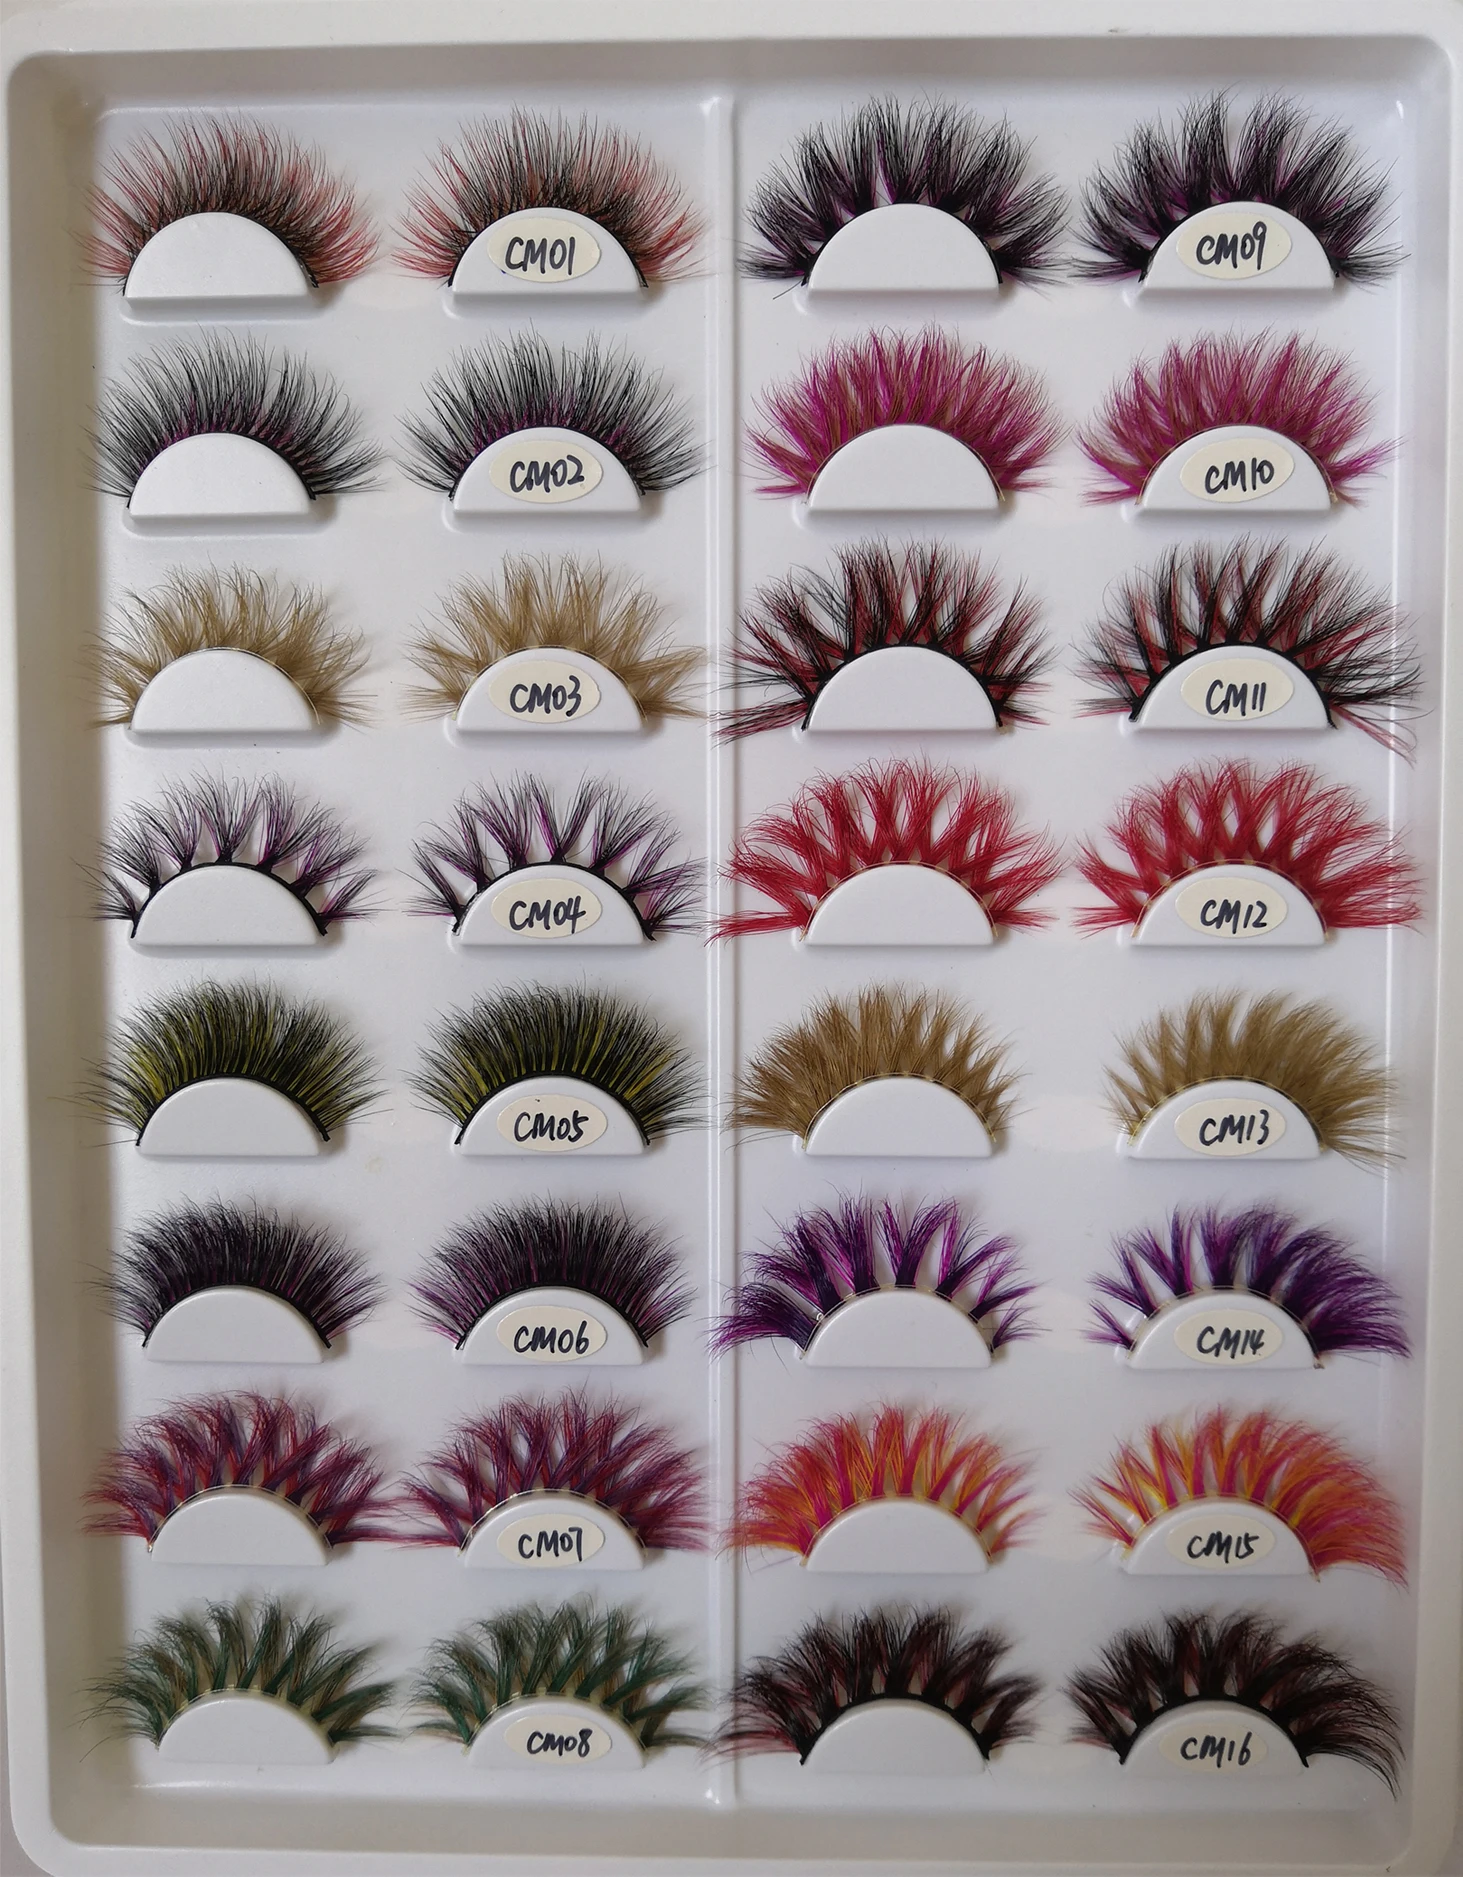 New color 3D luxury mink lashes wholesale natural long individual thick fluffy colorful false eyelashes Makeup Extension Tools